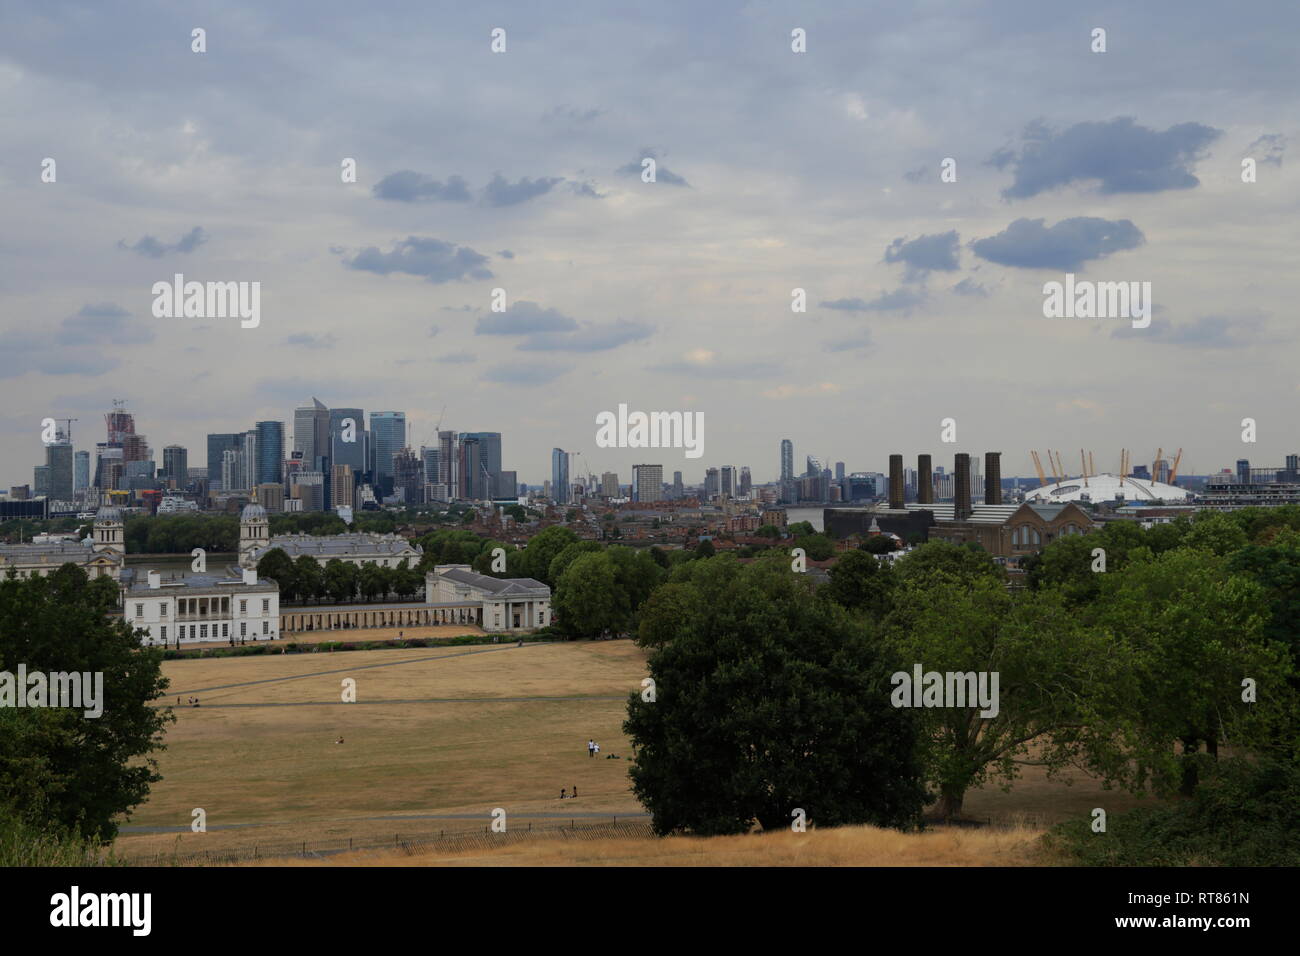 View over the city and architectural landmarks like the Old Royal Naval College and the O2 Arena from Greenwich in London, United Kingdom. Stock Photo